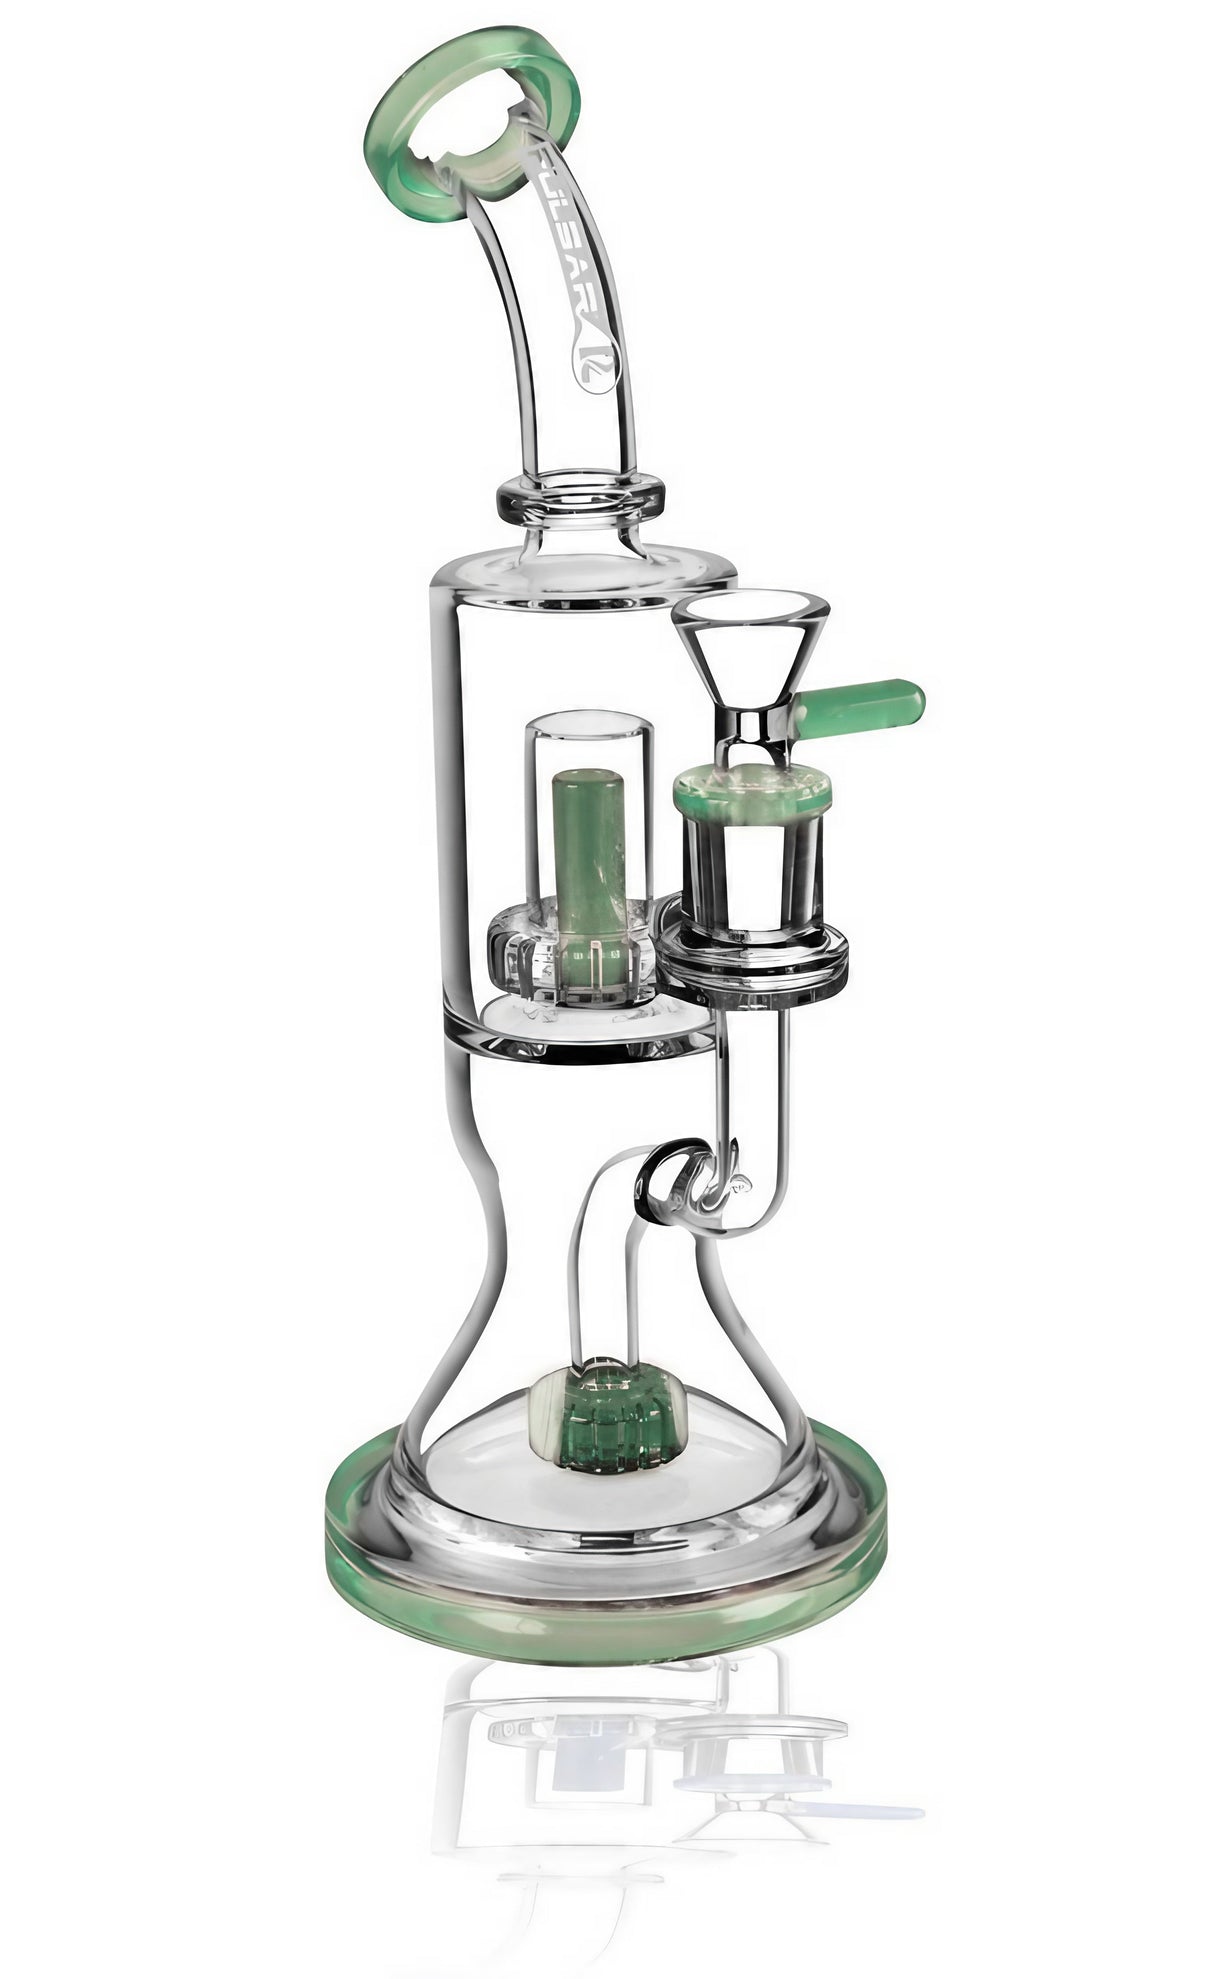 Pulsar 2 Tier Waterpipe - Front View - 10.5" Borosilicate Glass with 14mm Female Joint